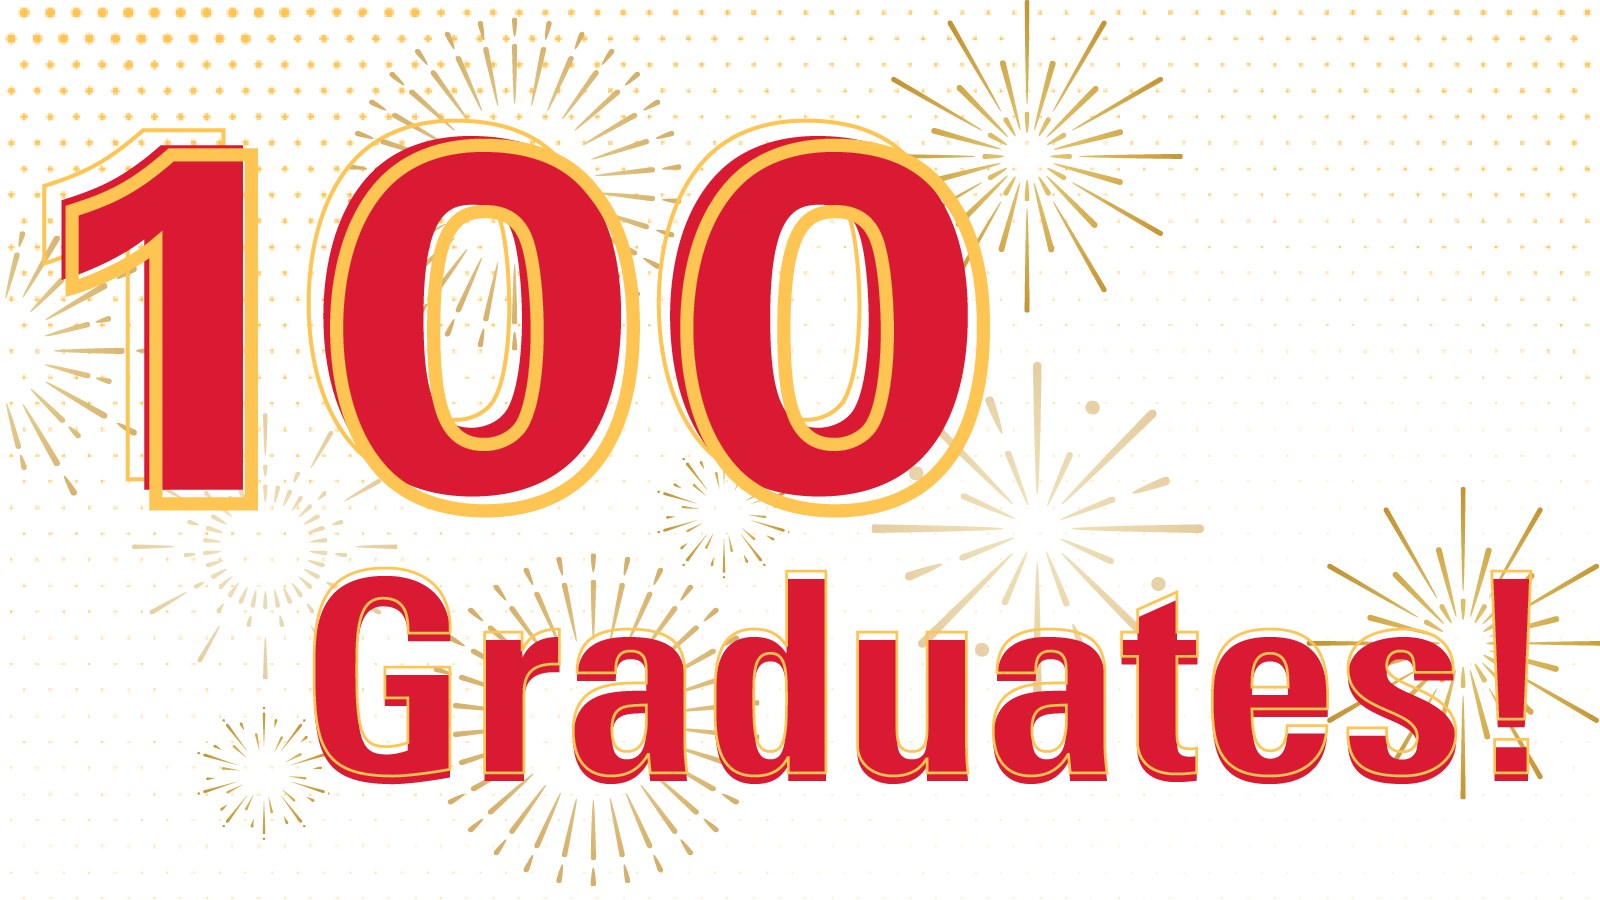 Iowa State Graduate Program in Seed Technology and Business Celebrates 100th Graduate